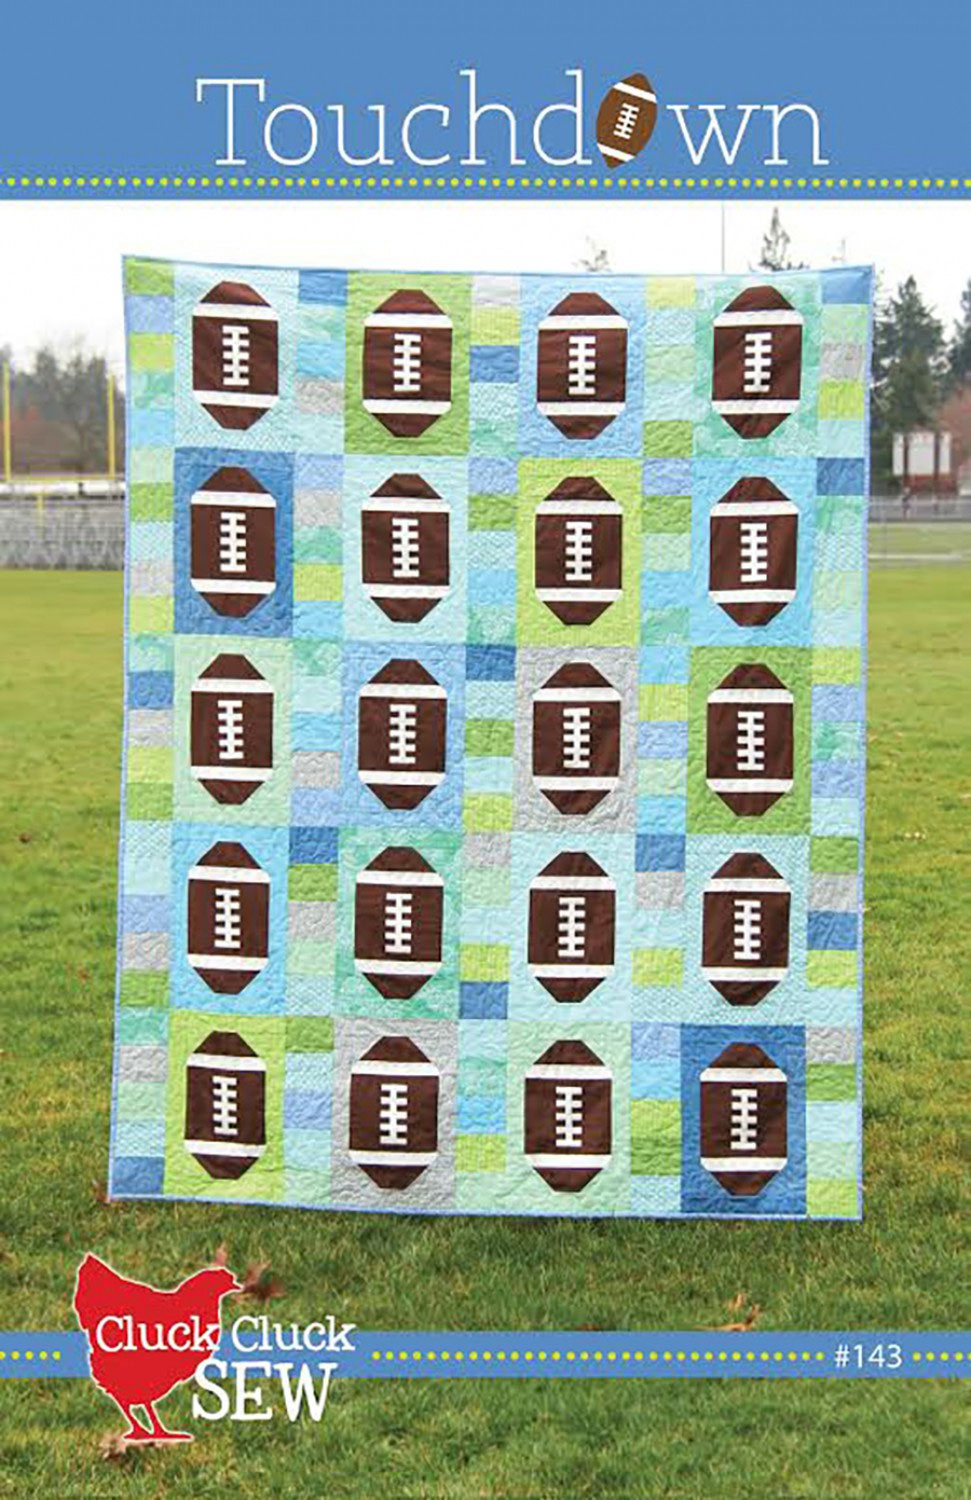 Touchdown-quilt-sewing-pattern-Cluck-Cluck-Sew-front